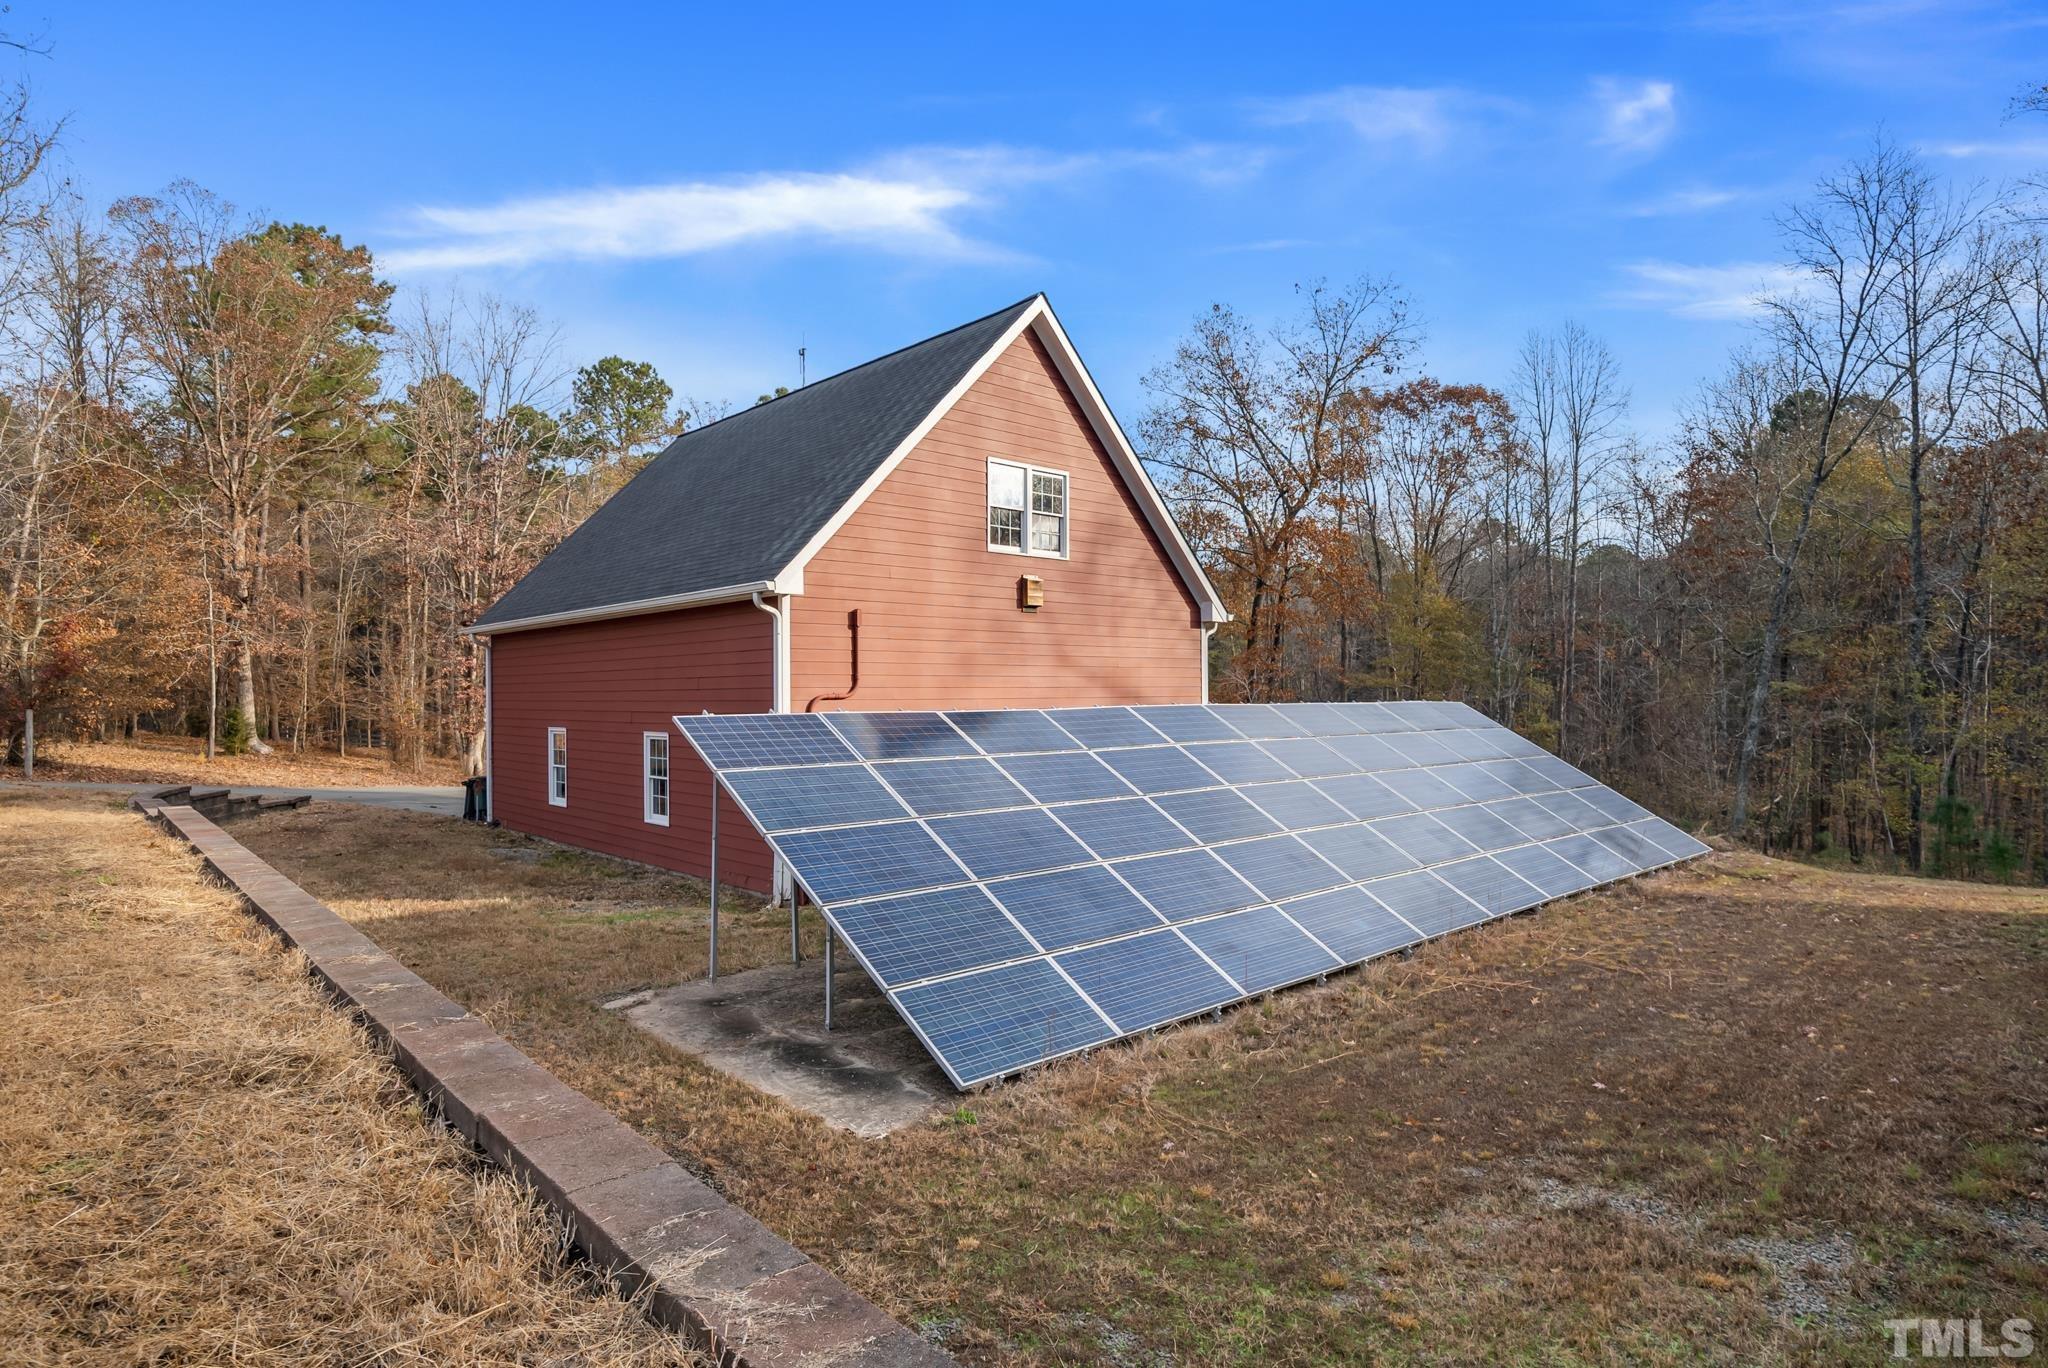 110 solar panels. Solar panels and batteries allow the home to be ???off the grid??? with little, if any, power consumption.